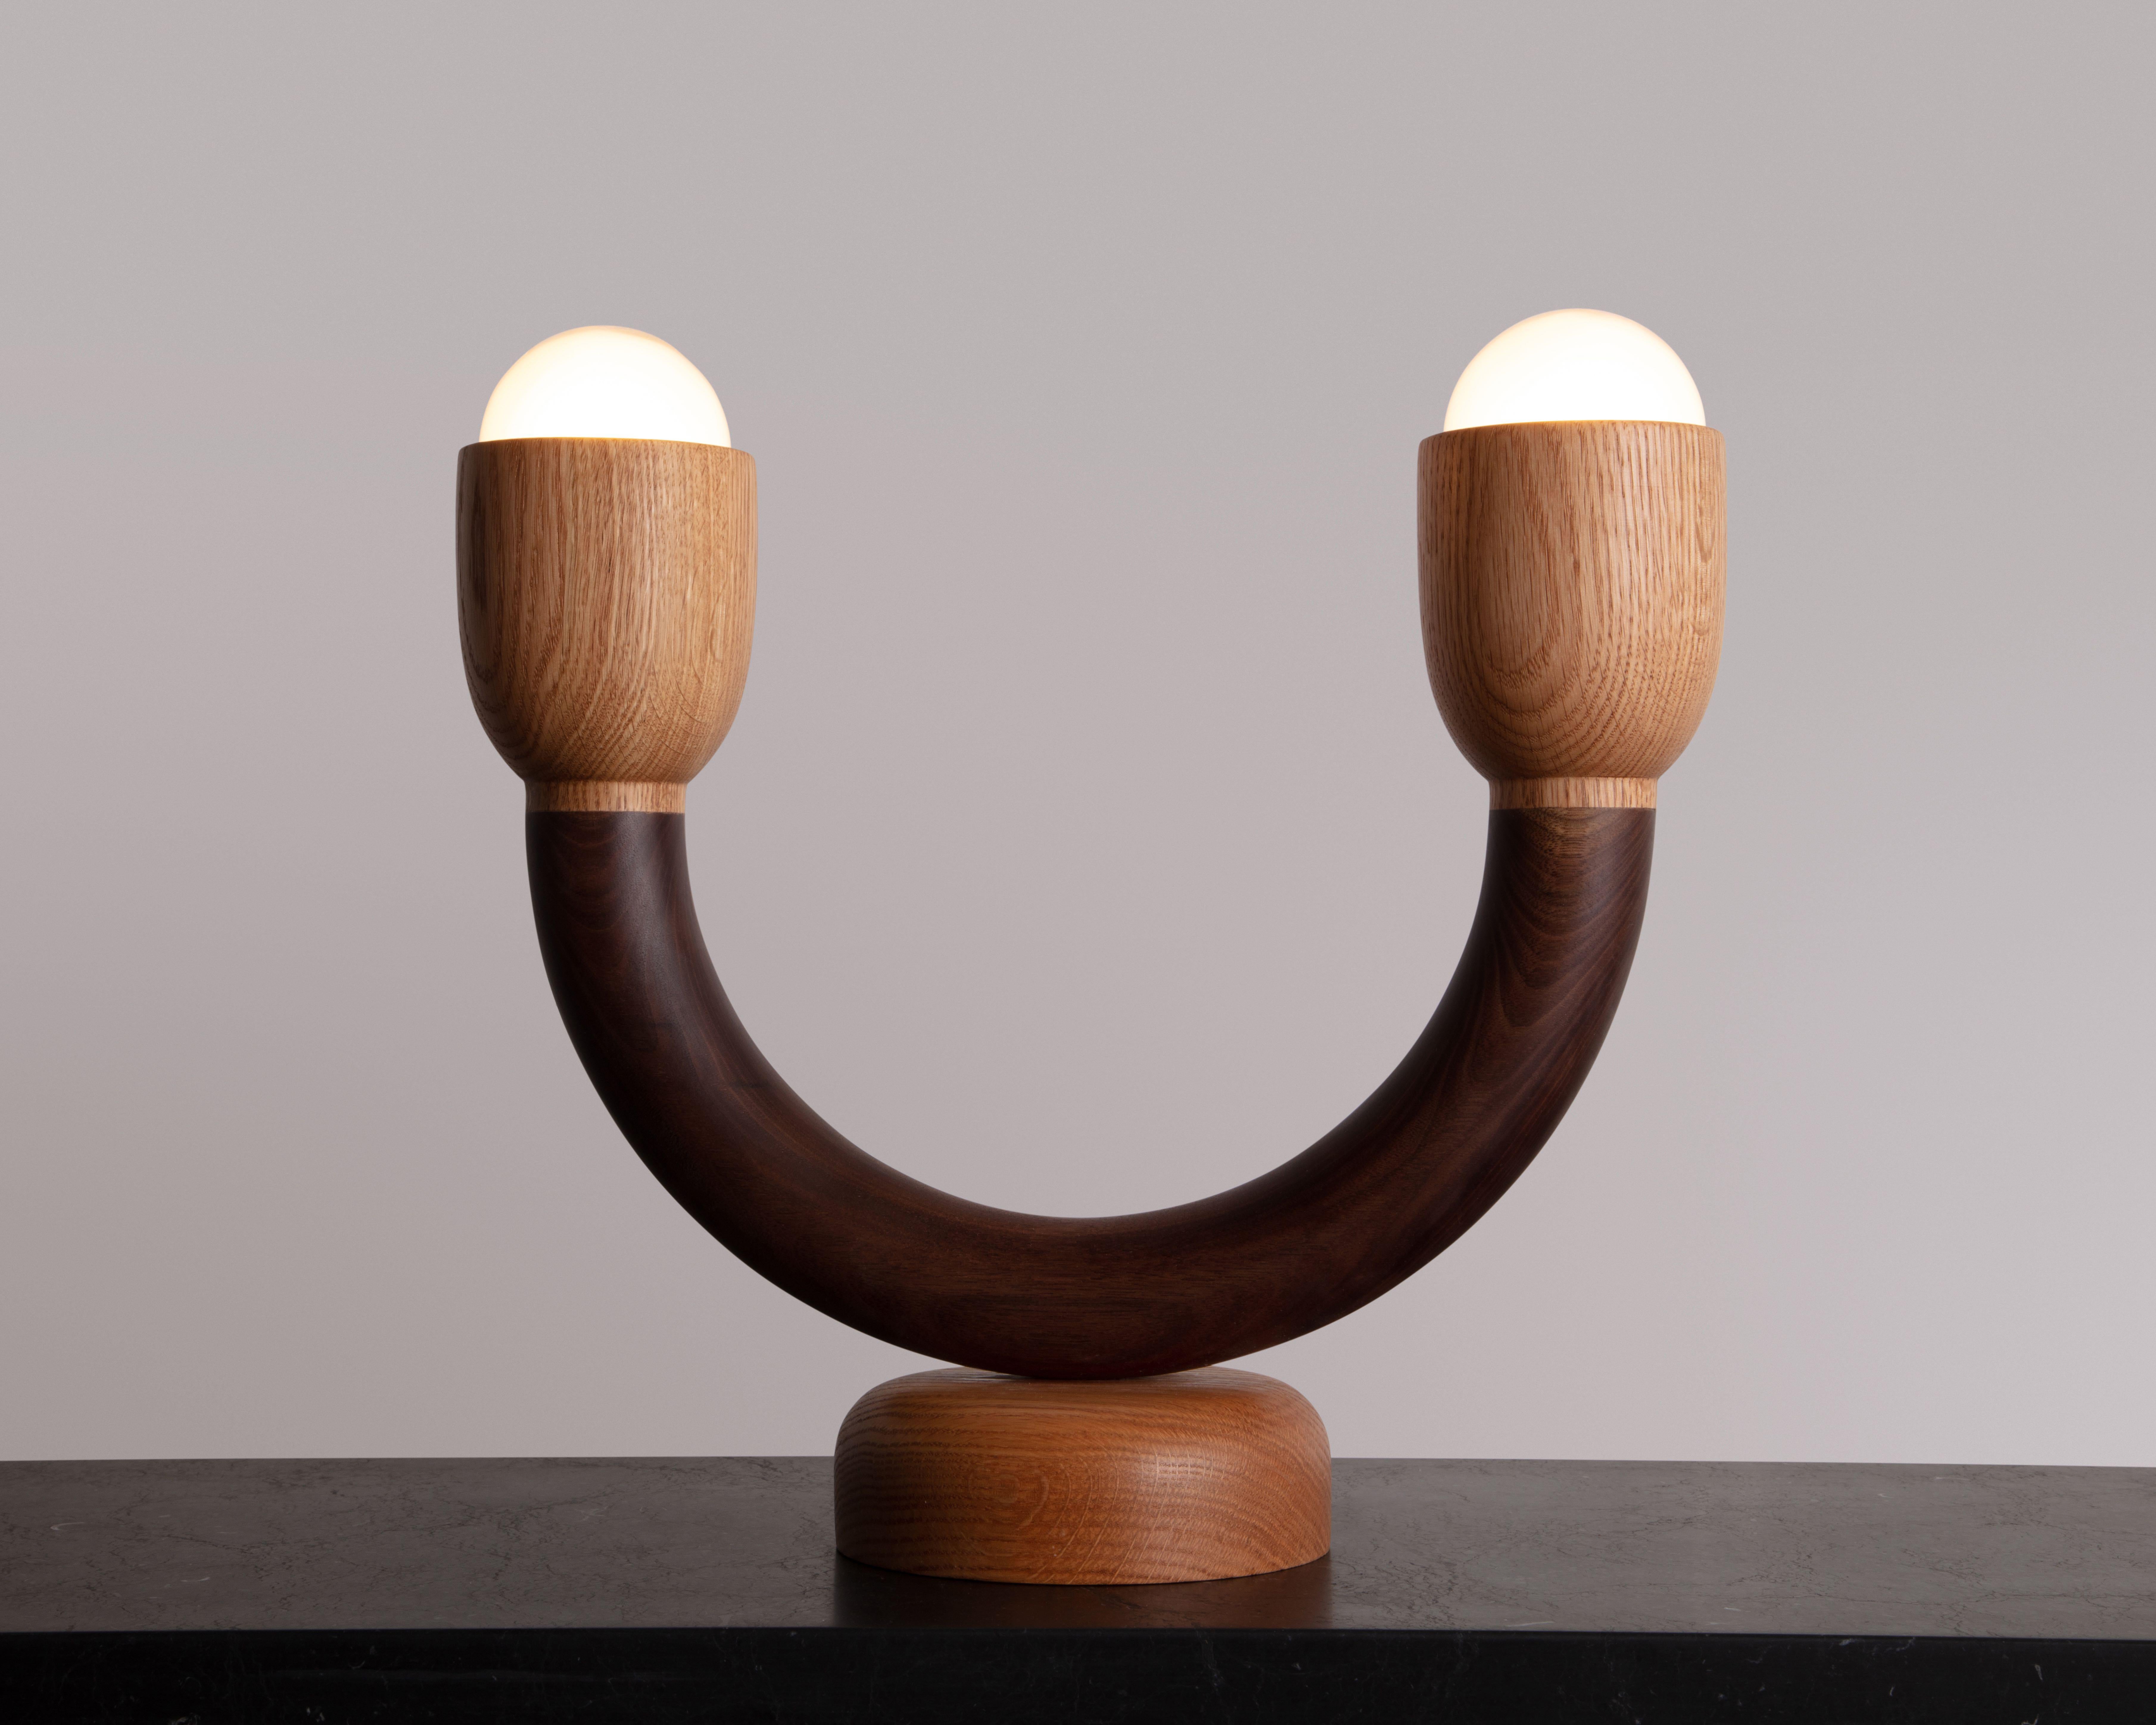 The Macaroni table light was created though an exploration of shaping solid walnut slab lumber. Designed to bring a smile to any space, each light is thoughtfully selected to highlight the grain pattern and characteristics of American black walnut.